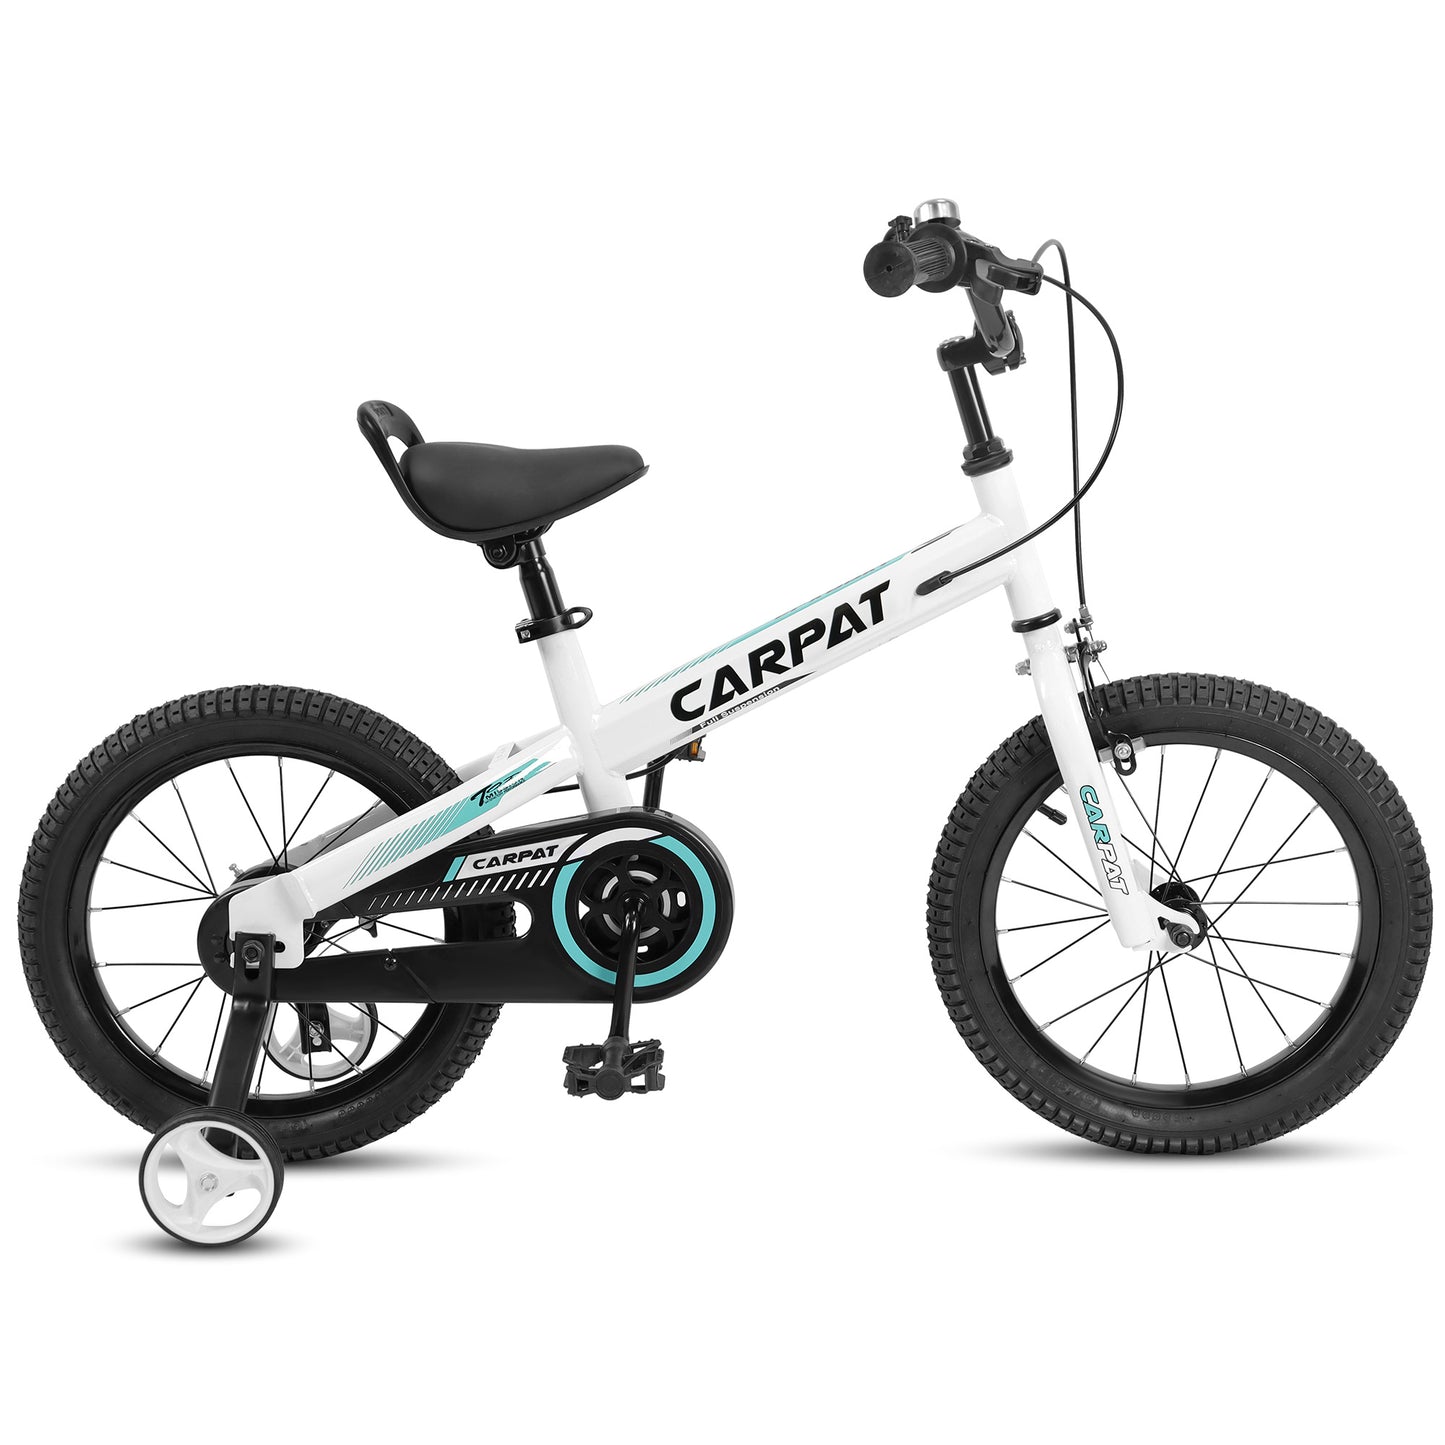 C14112A Ecarpat Kids' Bike 14 Inch Wheels, 1-Speed Boys Girls Child Bicycles For 3-5 Years, With Removable Training Wheels Baby Toys, Coaster+U Brake